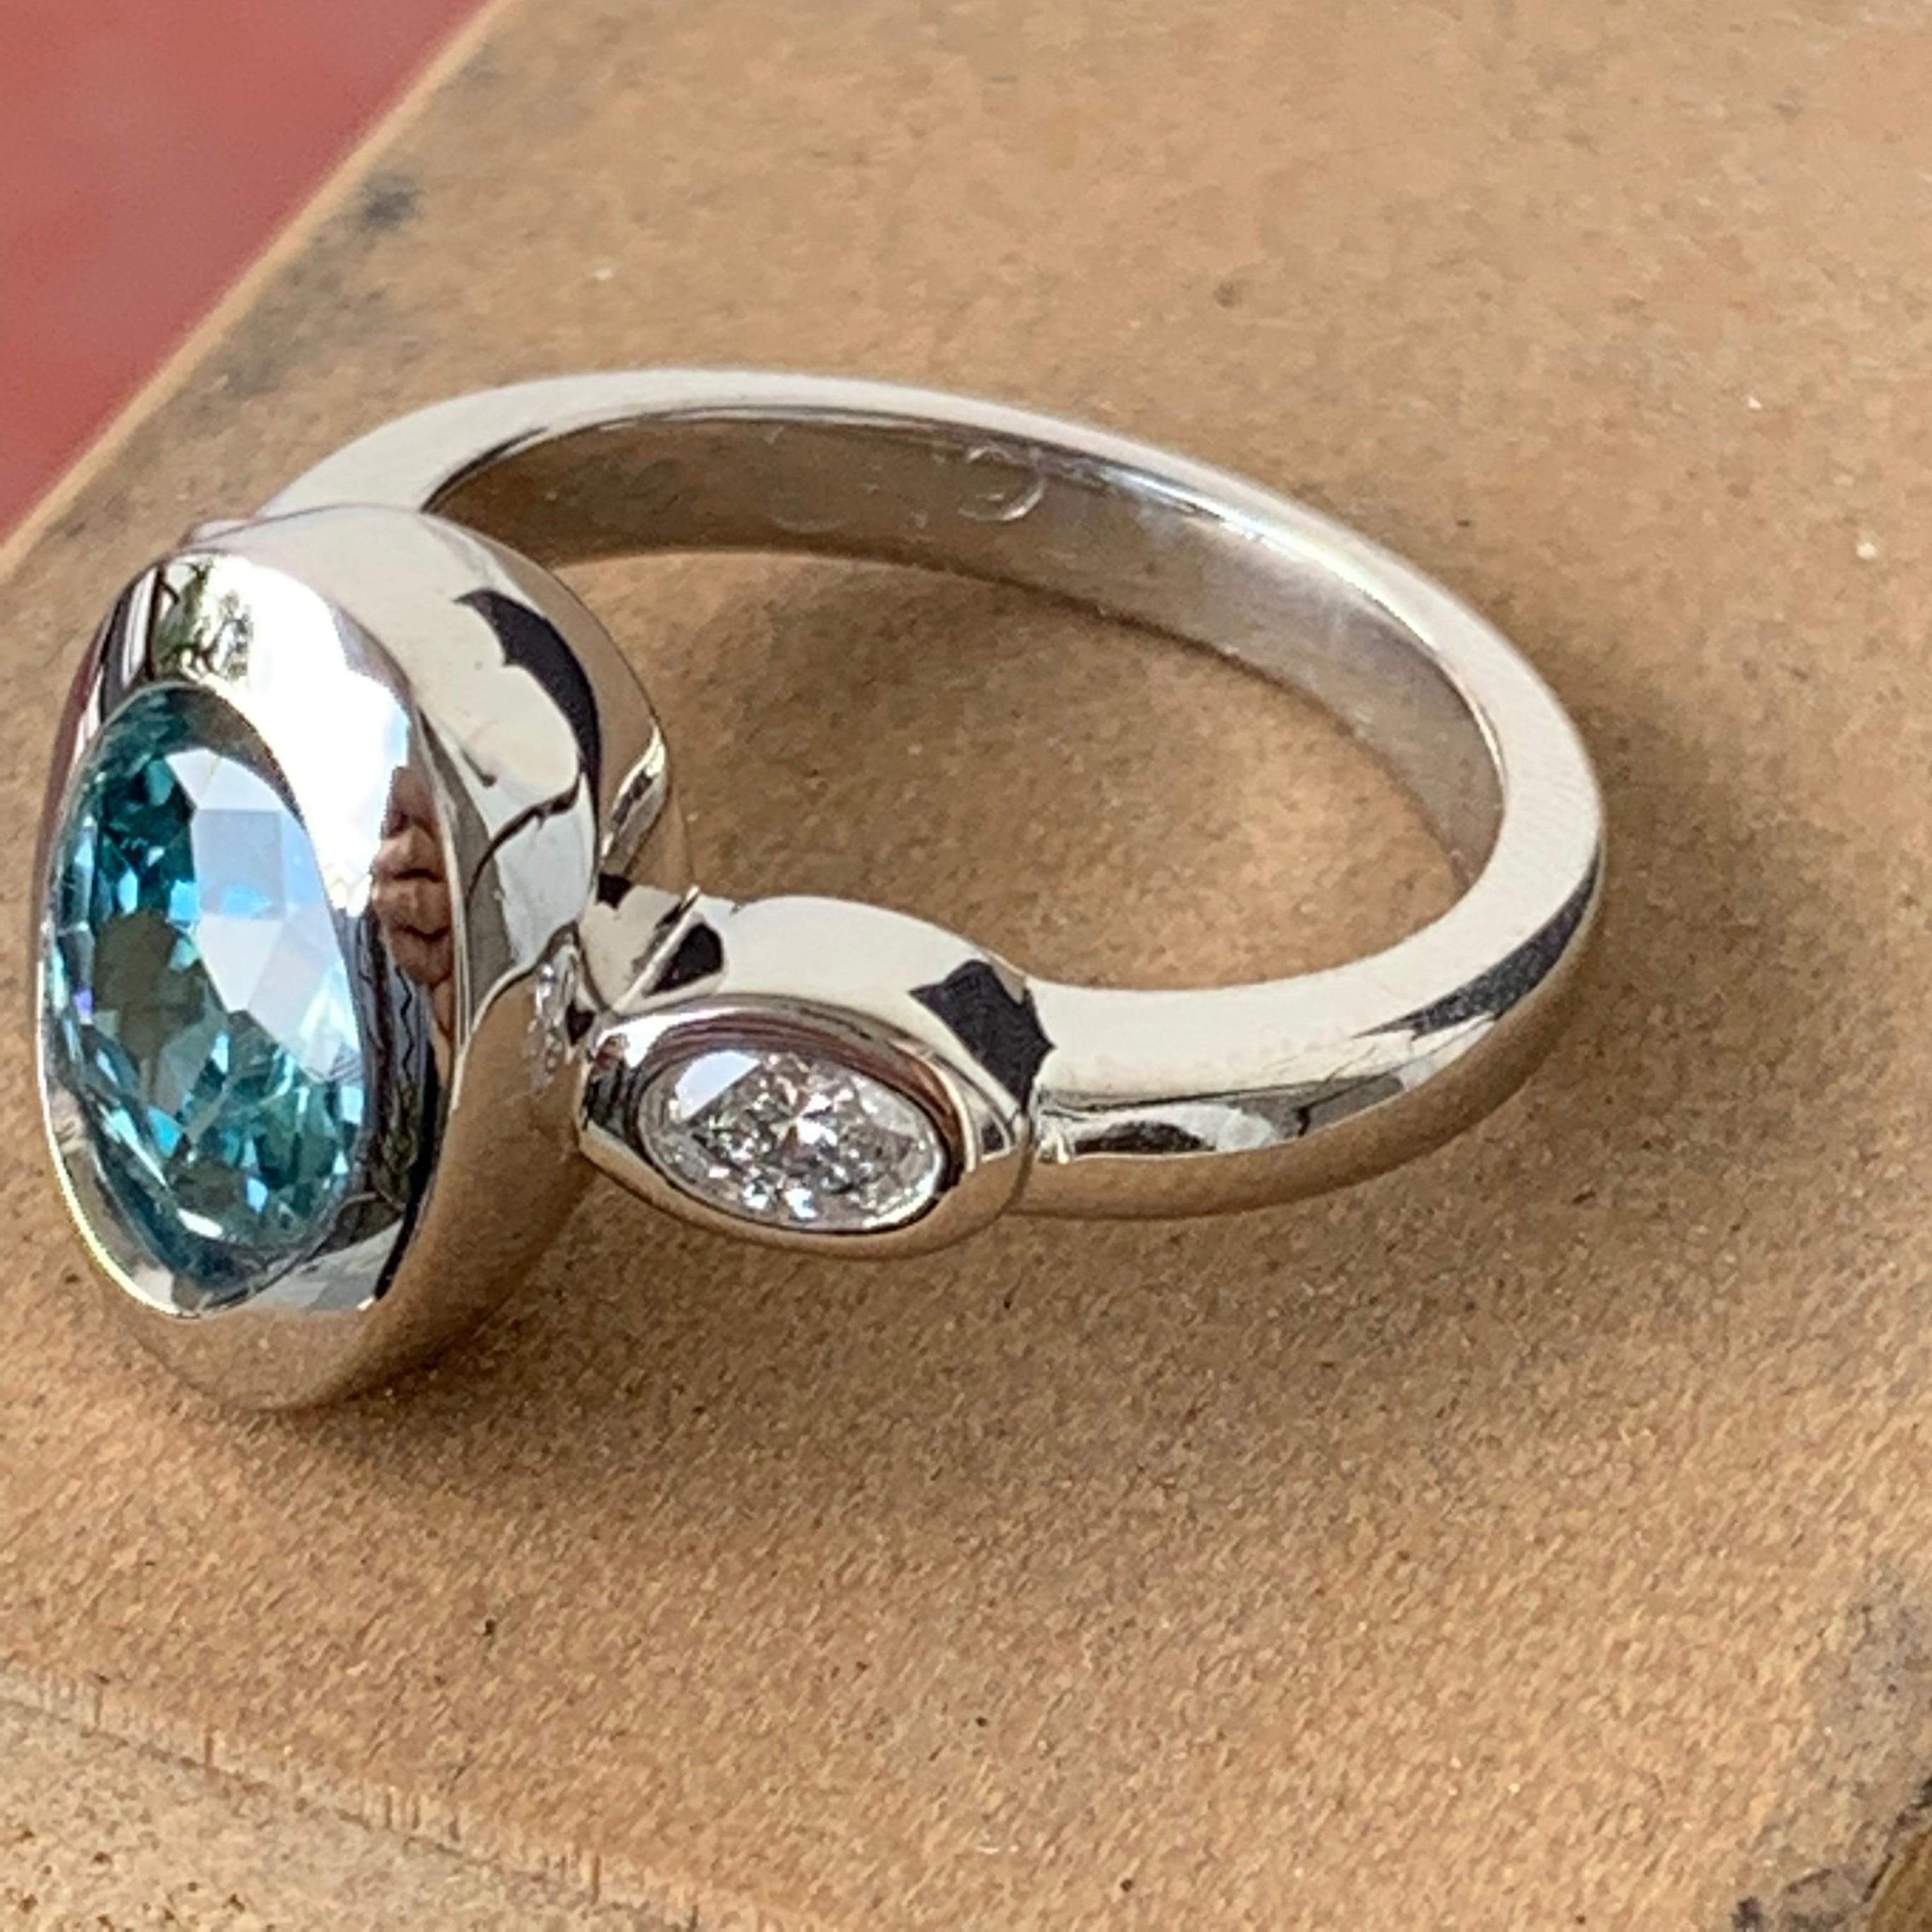 Refurb-1300064

Can be sized to any finger size, this ring will be made to order and take approximately 1-3 weeks from customers final design approval. If you need a sooner date let us know and we will see if we can accommodate you. Carat weight and